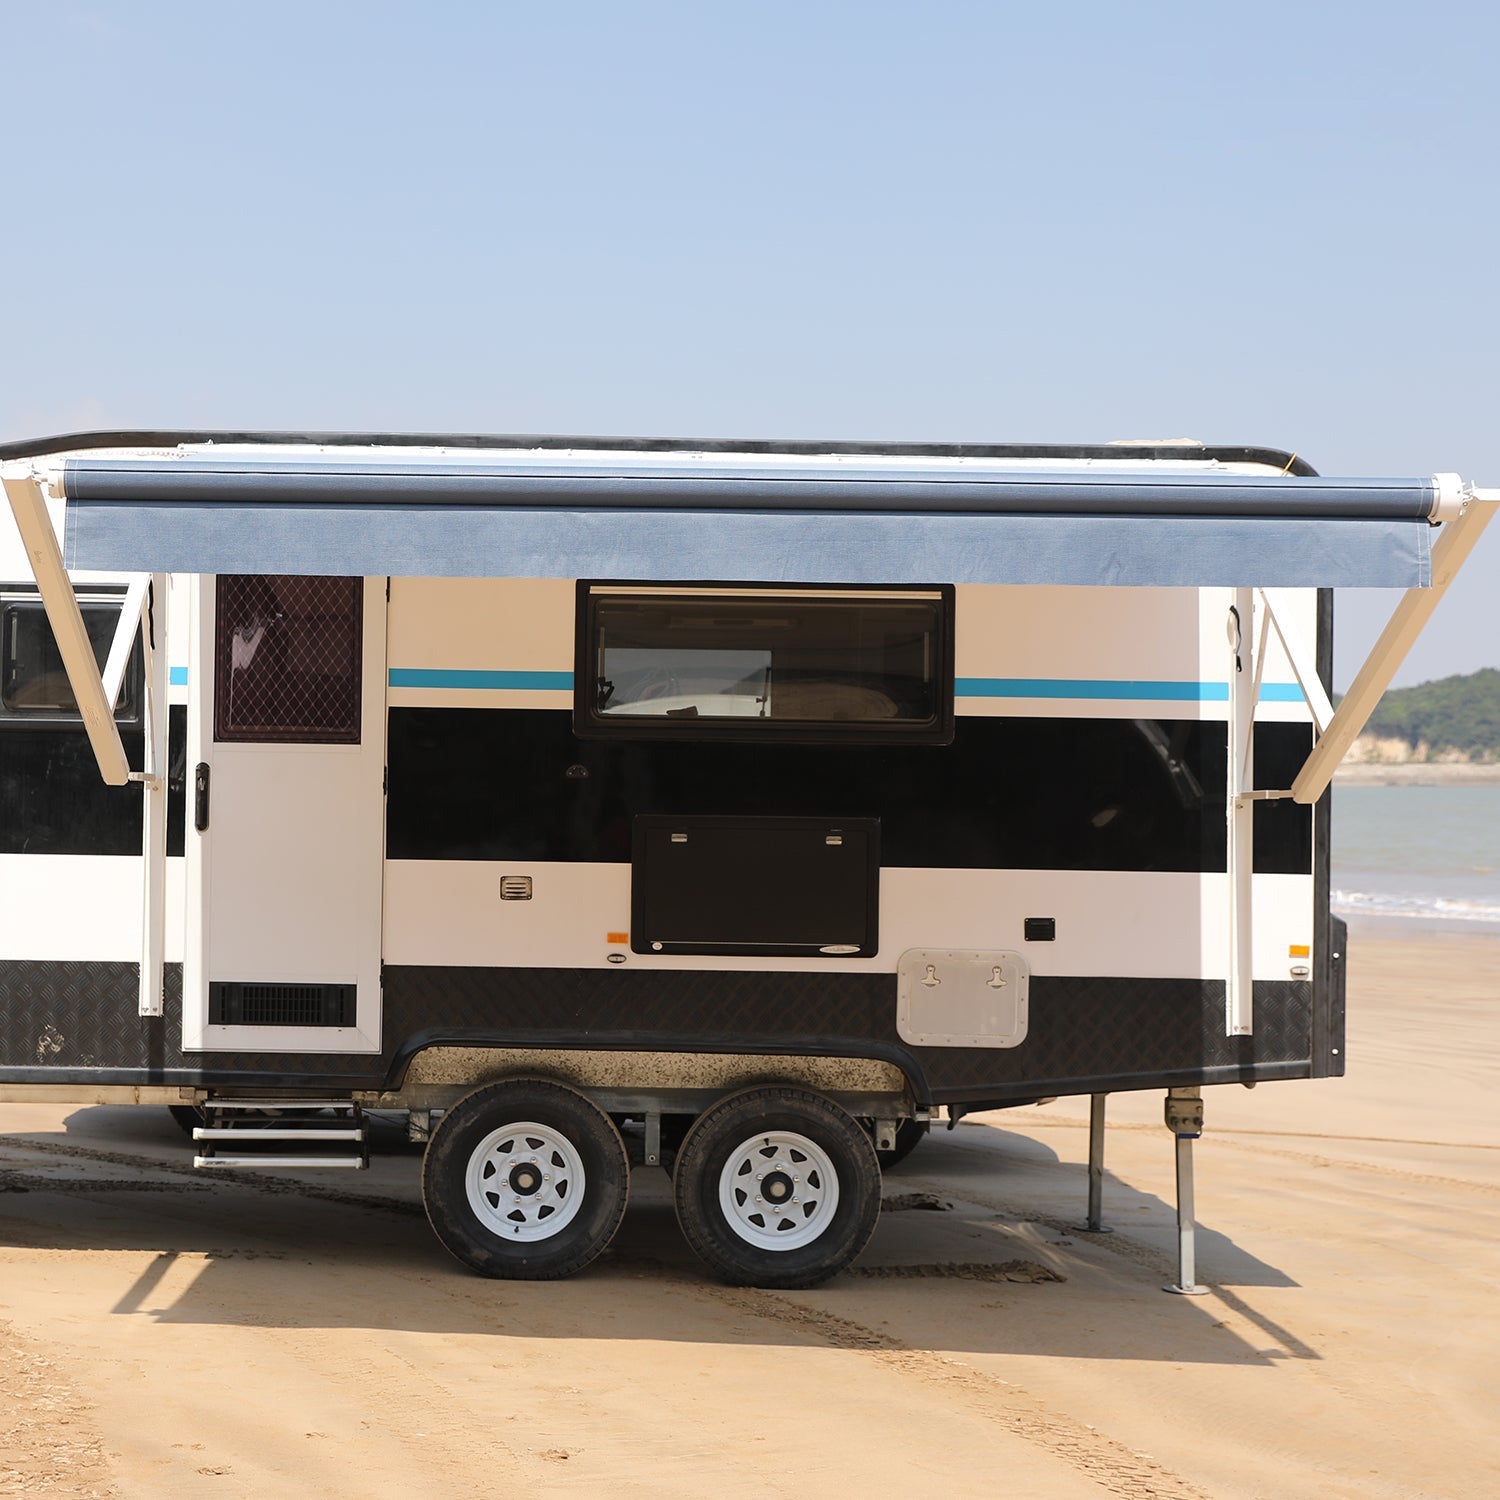 AWNLUX Electric RV Patio Awning - White Frame - AWNLUX